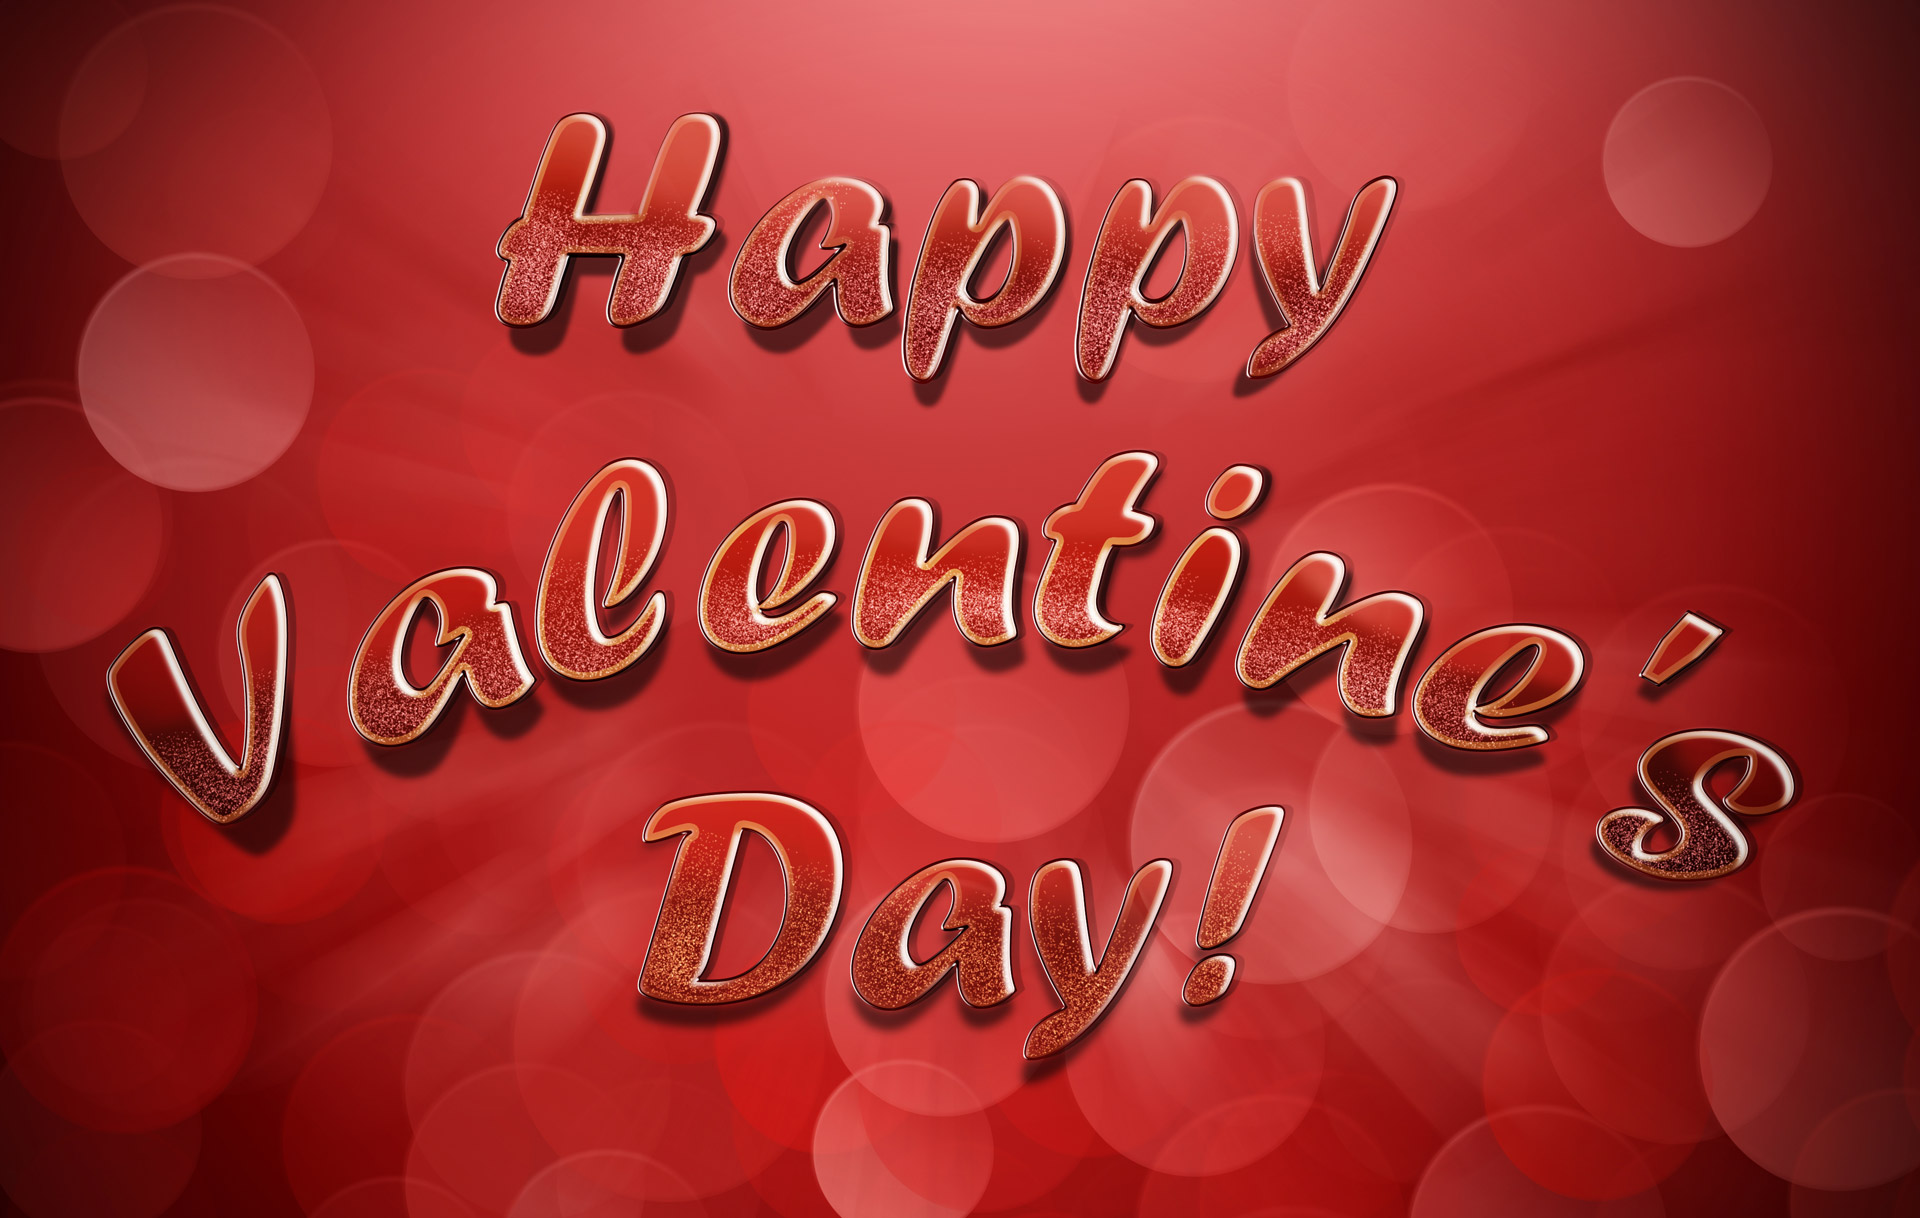 Awesome Wallpapers, HD Images, Photos, Greeting Cards (Valentines ...